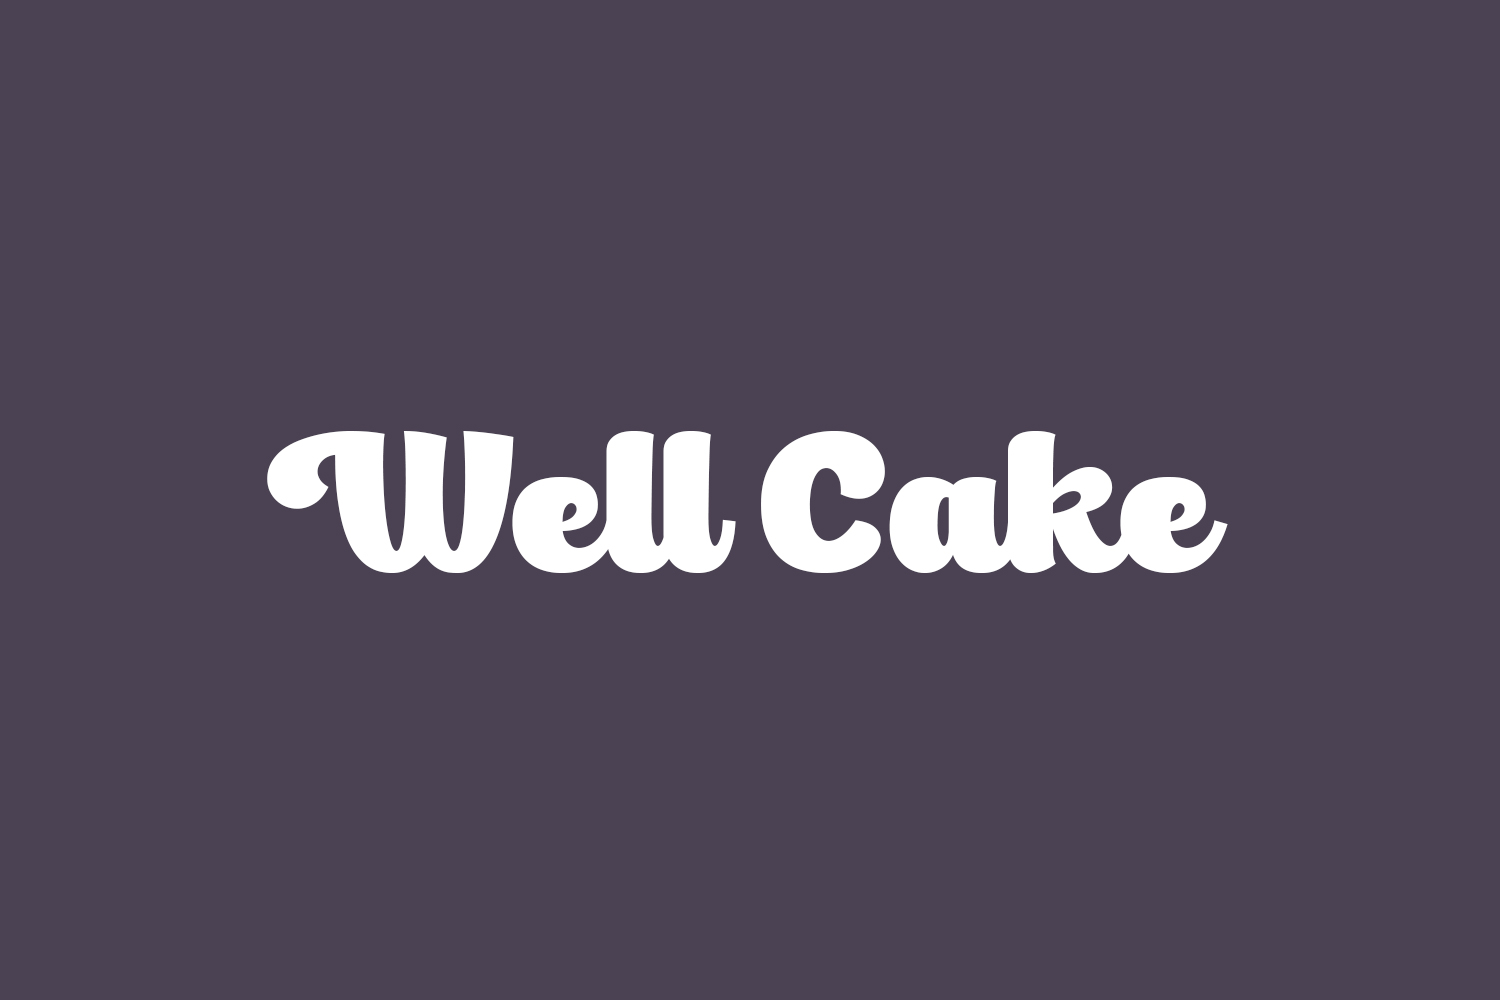 Well Cake Free Font